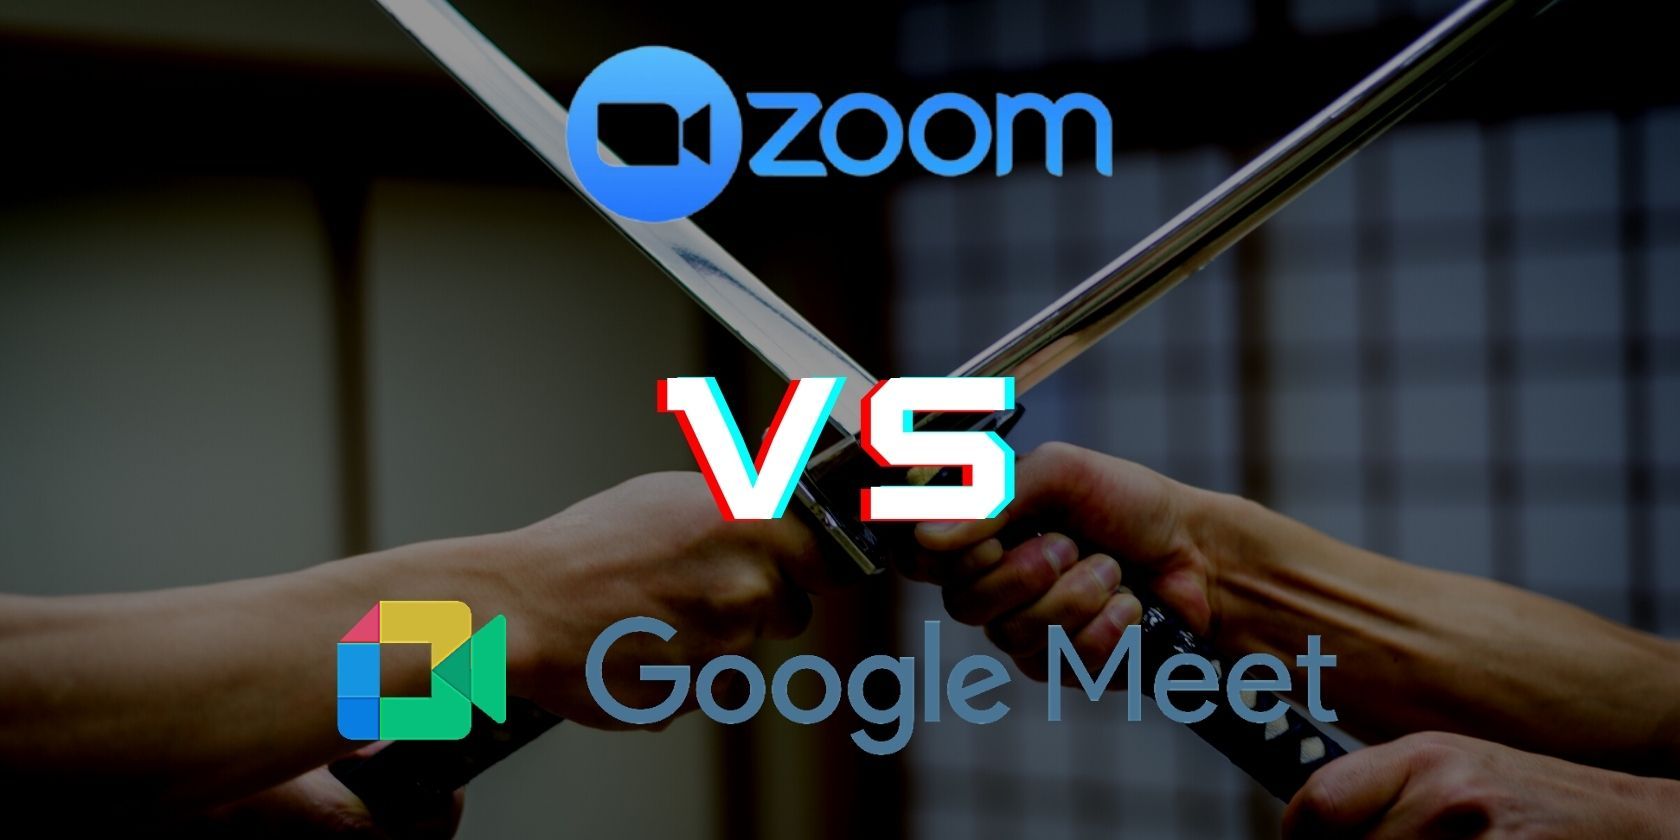 Google Meet Vs Zoom: Which Video Conferencing Tool Should You Choose